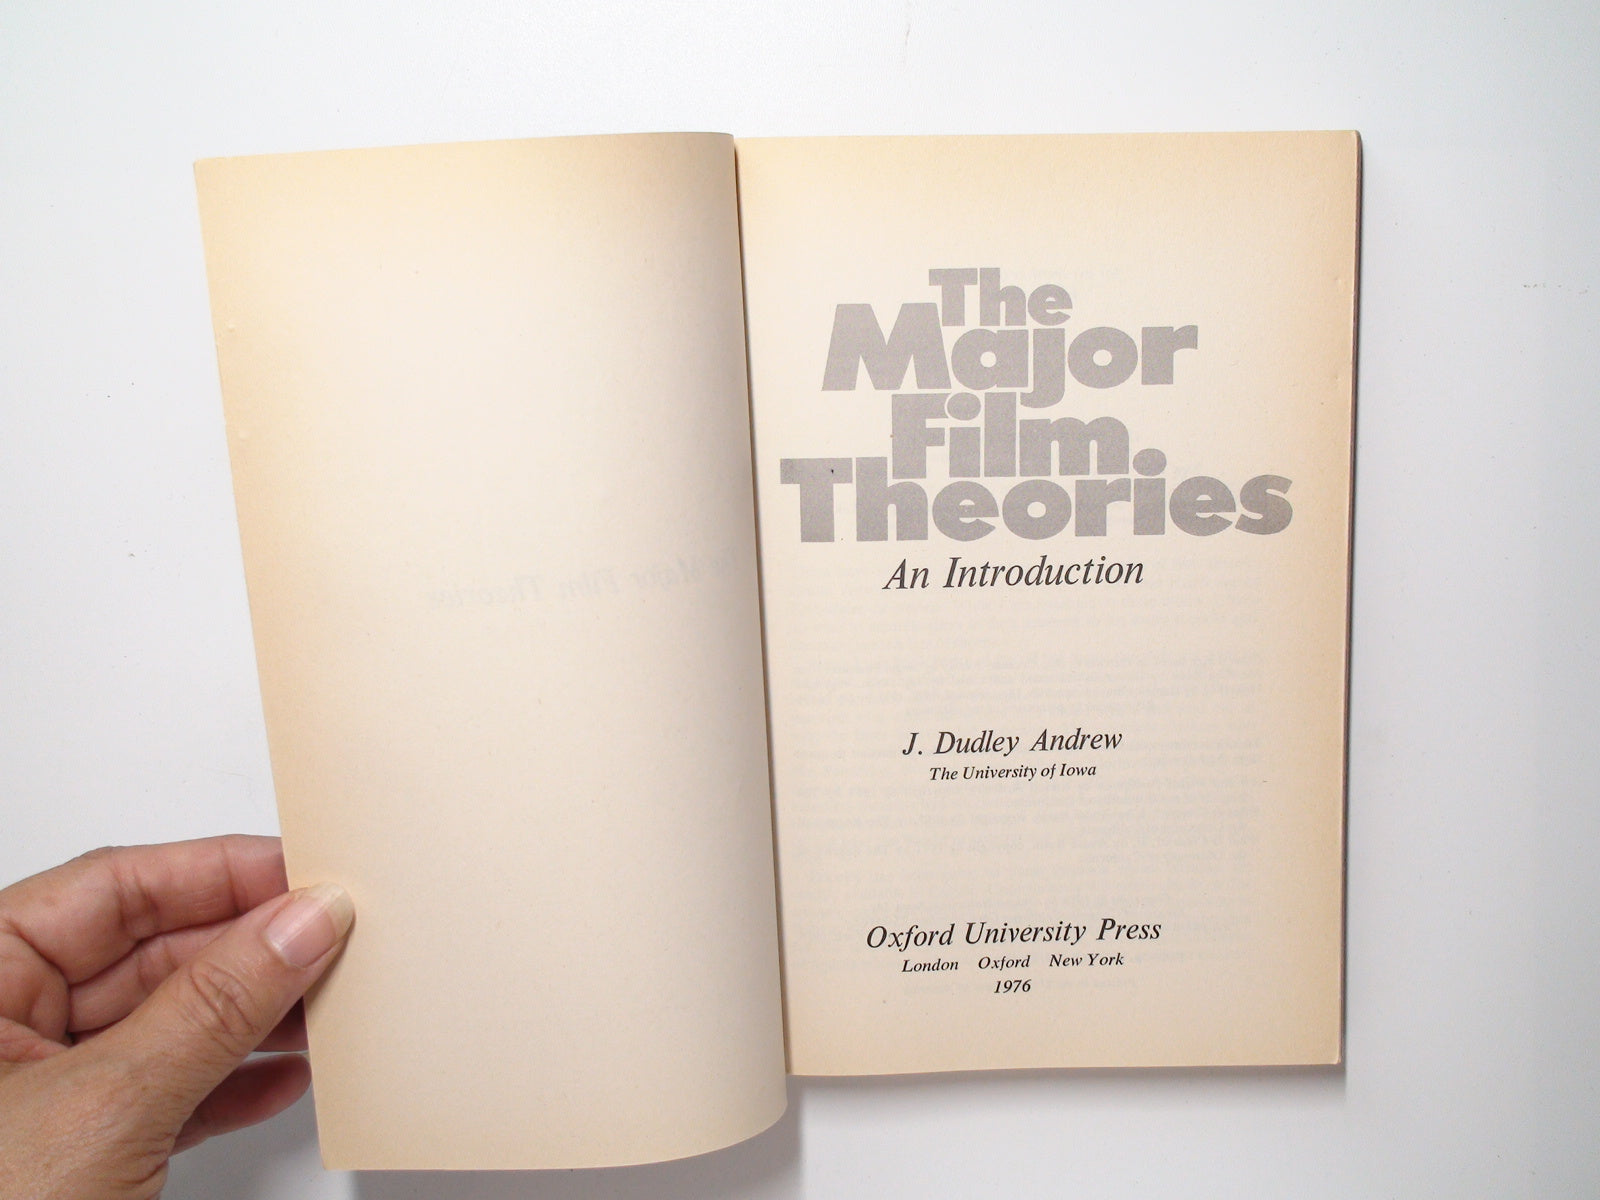 The Major Film Theories, Andrew, J. Dudley, Paperback, 1976